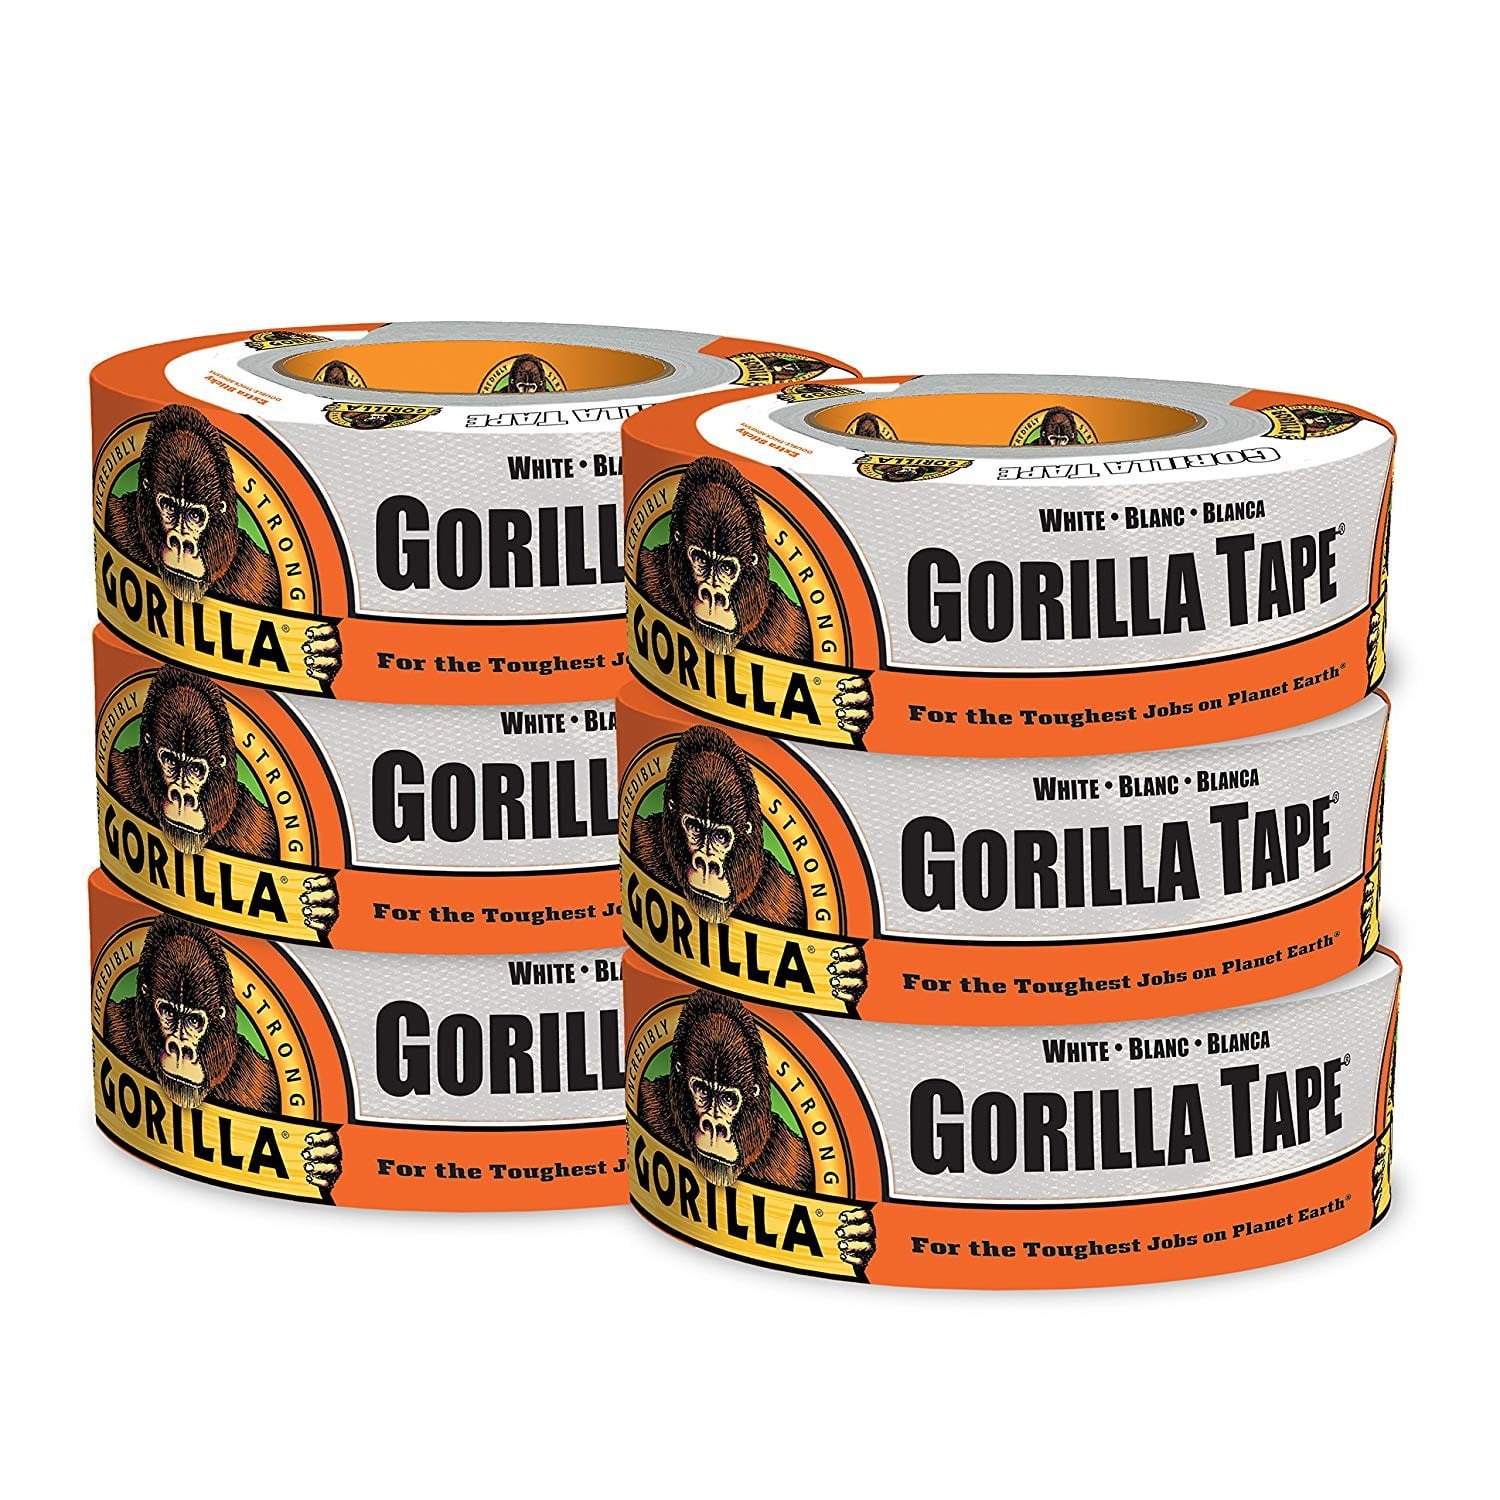 Gorilla White Duct Tape Adhesive Sealant Heavy Duty 1.88 Inch X 30 Yd 6 Pack Set 